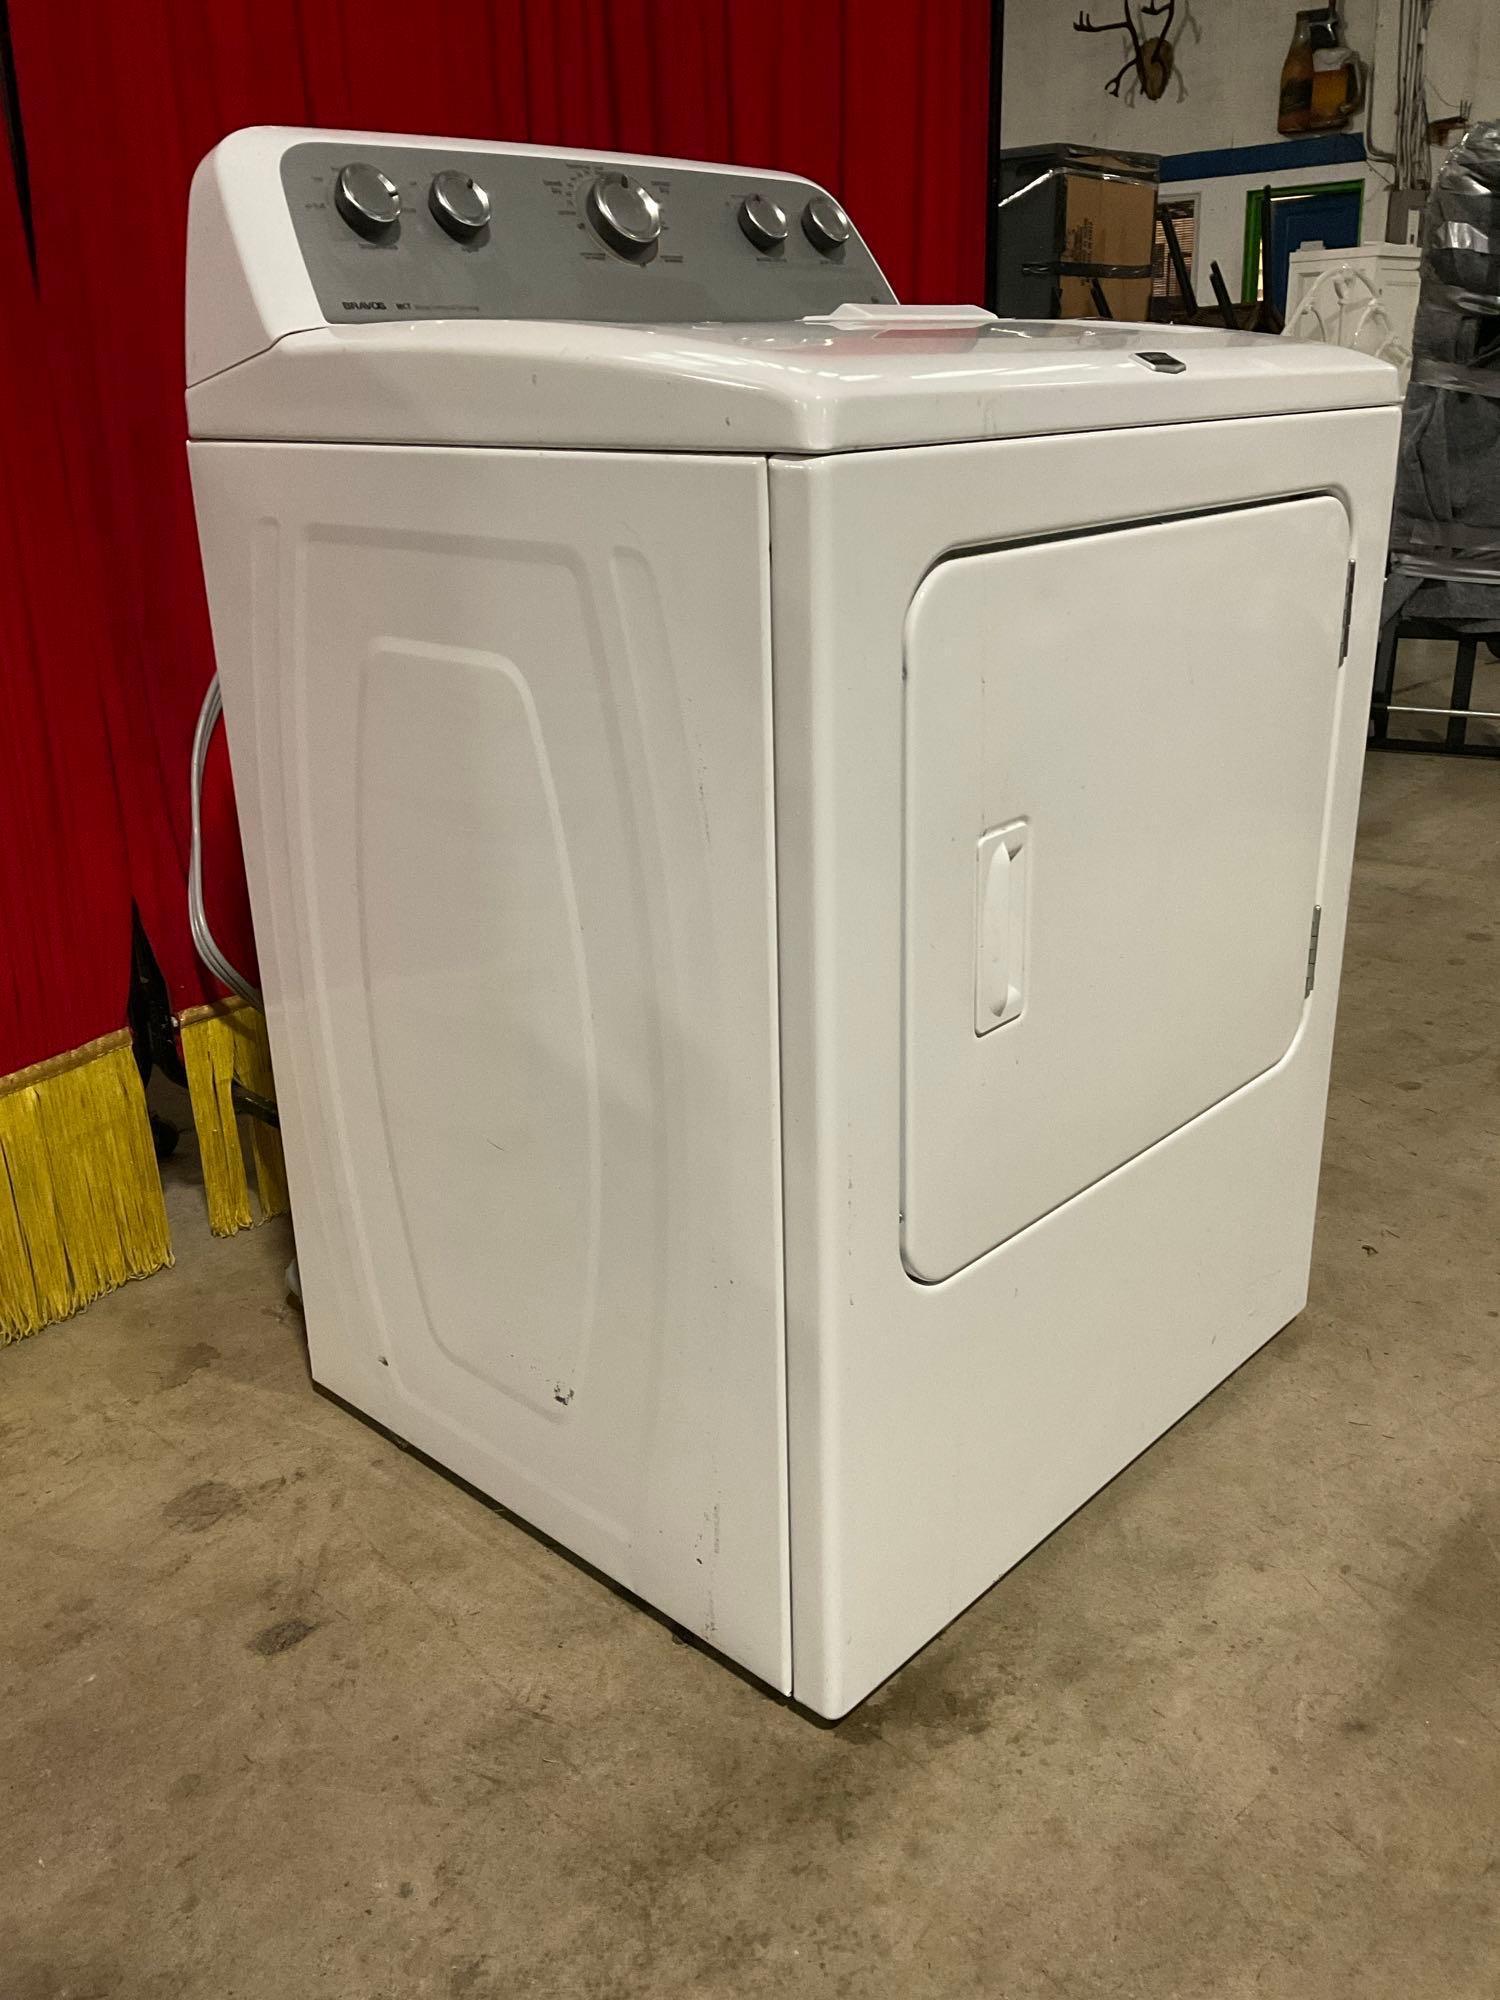 Maytag Bravos MCT Maytag Commercial Technology Front Load Dryer Model Medx500bw0 white 7.4 Cu.